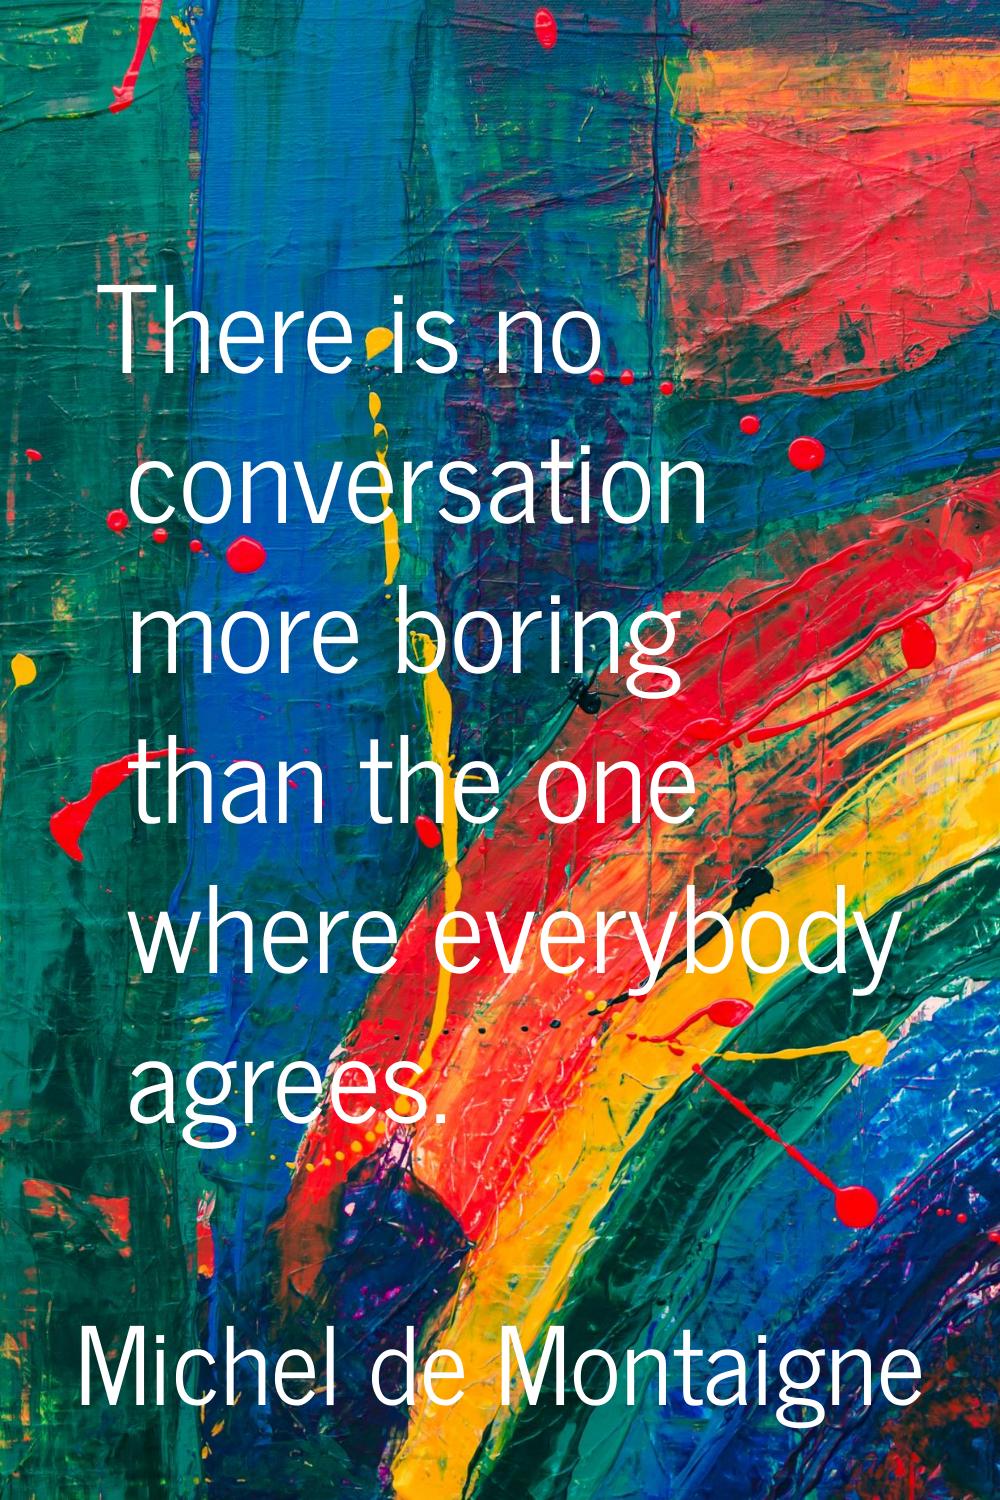 There is no conversation more boring than the one where everybody agrees.